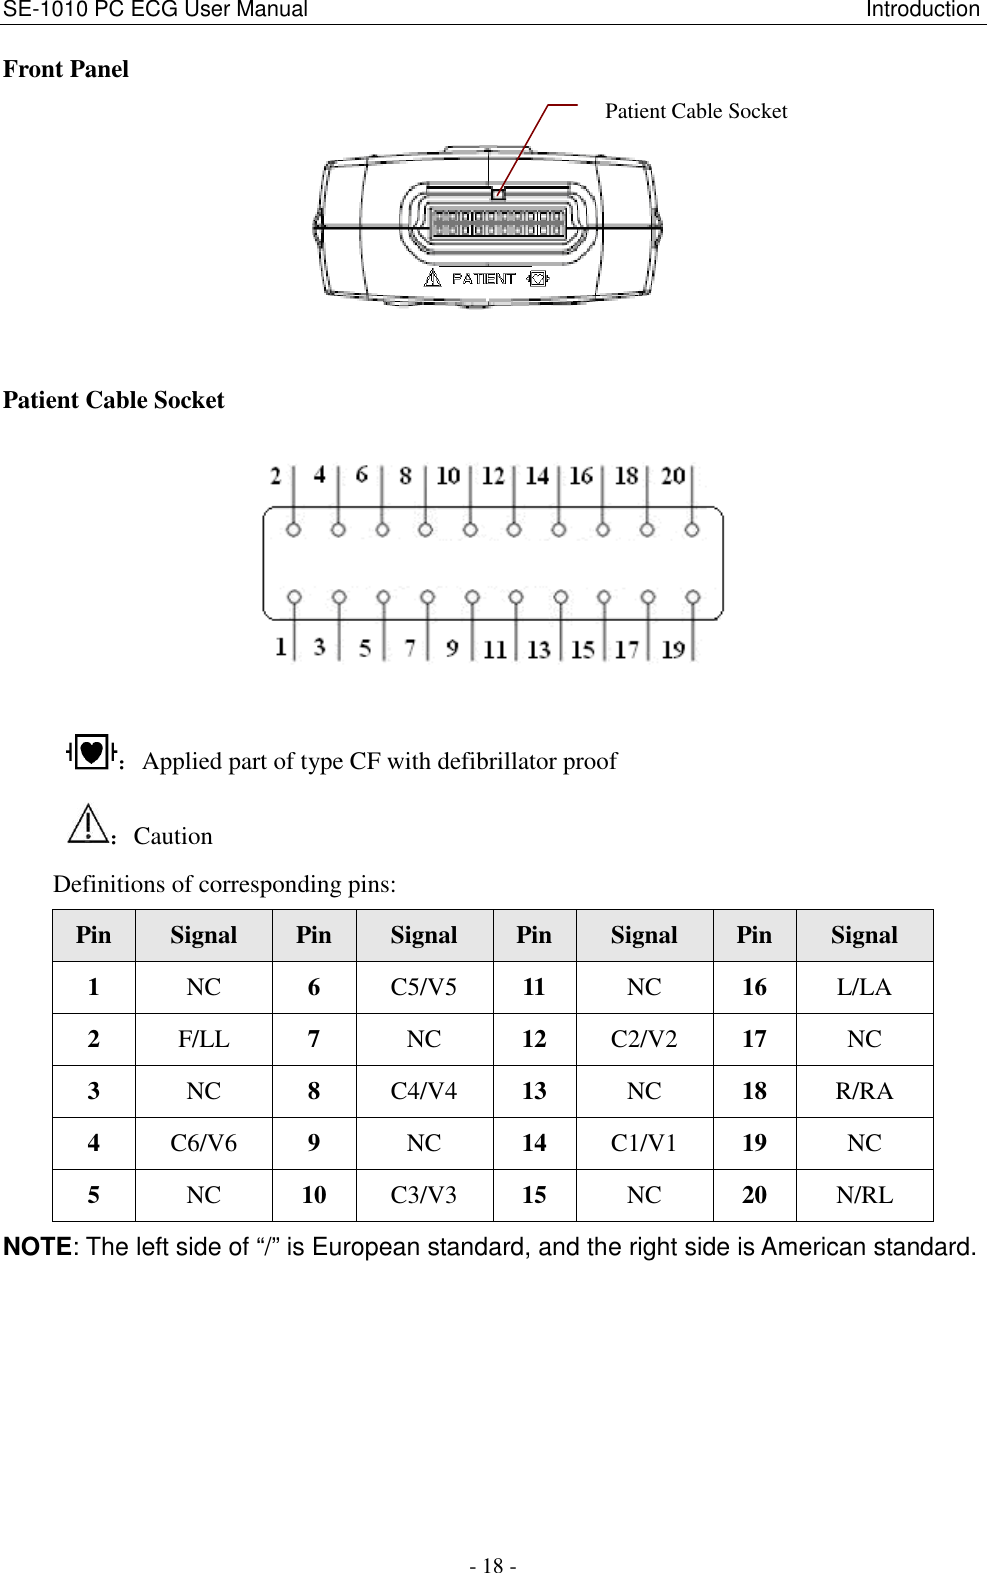 SE-1010 PC ECG User Manual                                                                                                      Introduction - 18 - Front Panel    Patient Cable Socket    ：Applied part of type CF with defibrillator proof ：Caution     Definitions of corresponding pins: Pin  Signal  Pin  Signal  Pin  Signal  Pin  Signal 1  NC  6  C5/V5  11  NC  16  L/LA 2  F/LL  7  NC  12  C2/V2  17  NC 3  NC  8  C4/V4  13  NC  18  R/RA 4  C6/V6  9  NC  14  C1/V1  19  NC 5  NC  10  C3/V3  15  NC  20  N/RL NOTE: The left side of “/” is European standard, and the right side is American standard. Patient Cable Socket 